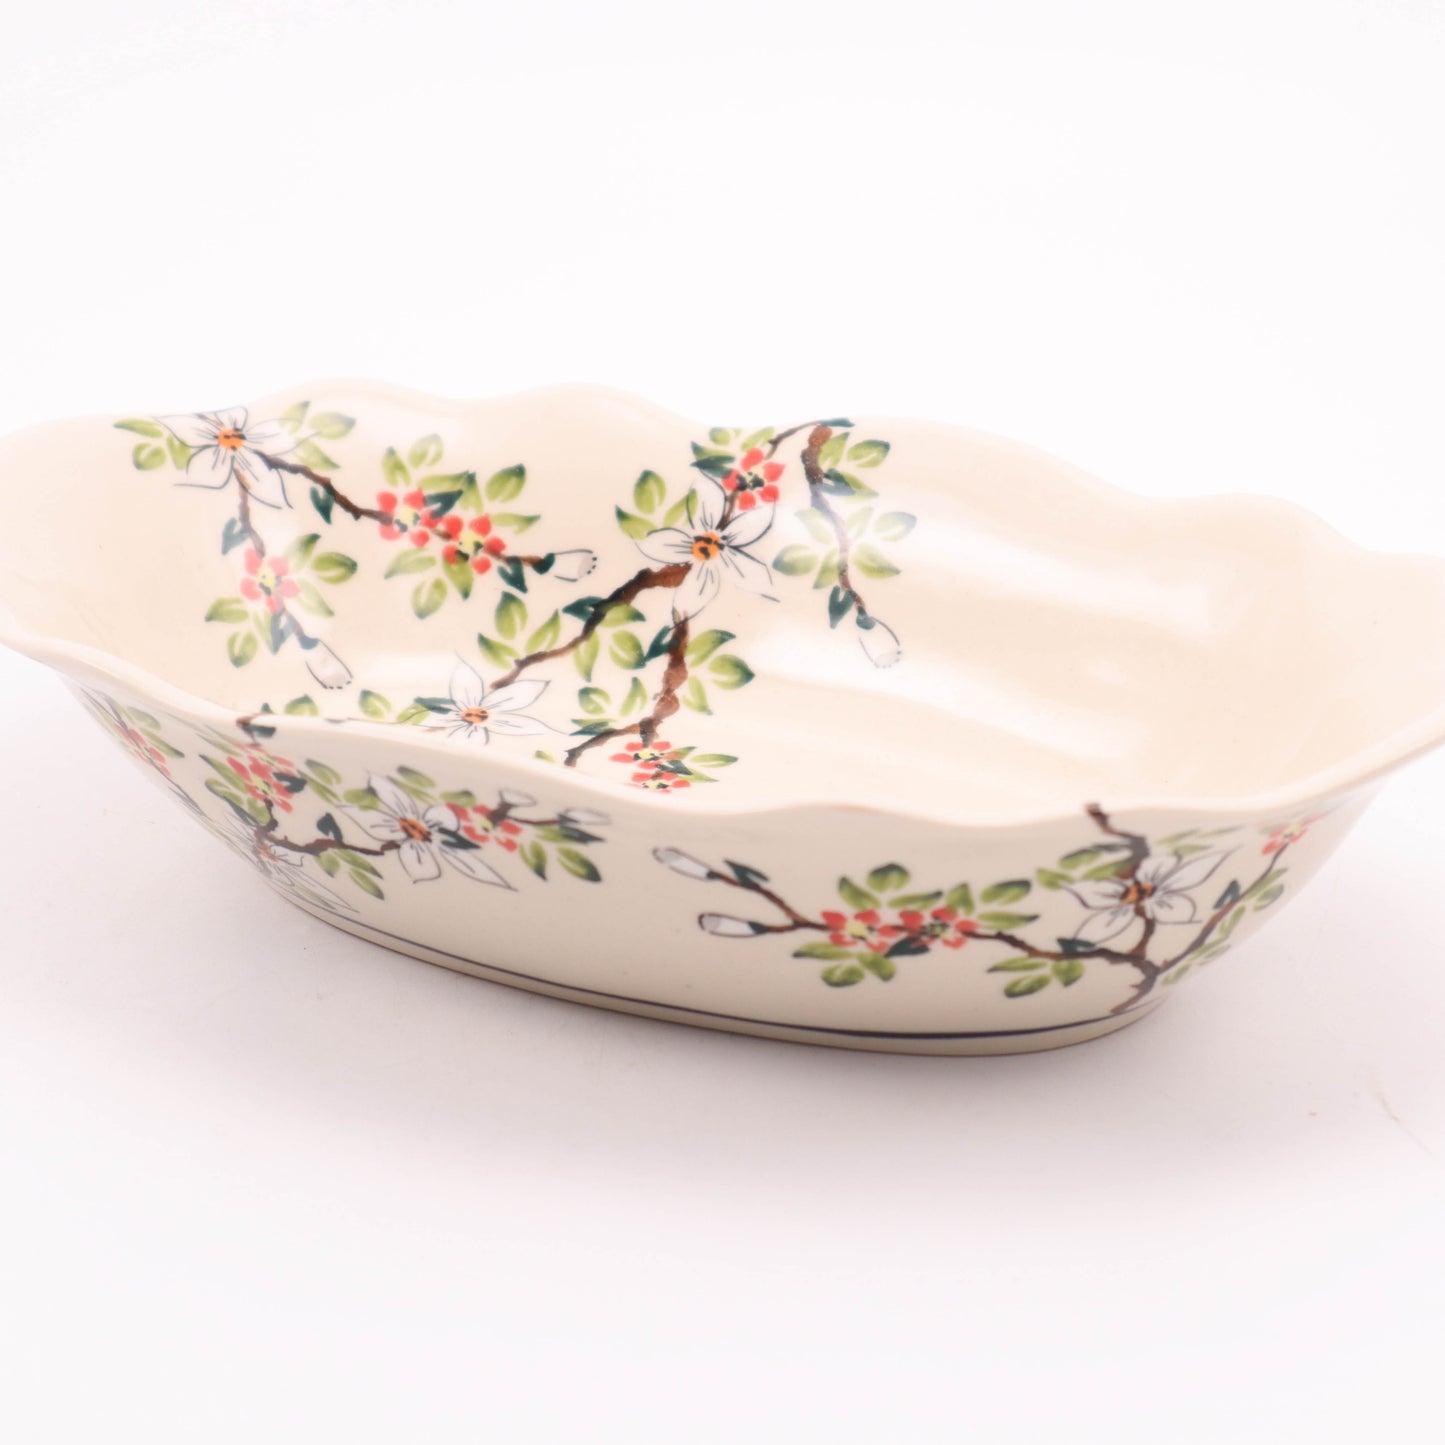 10"x7" Waved Oval Bowl. Pattern: Apple Blossom Red